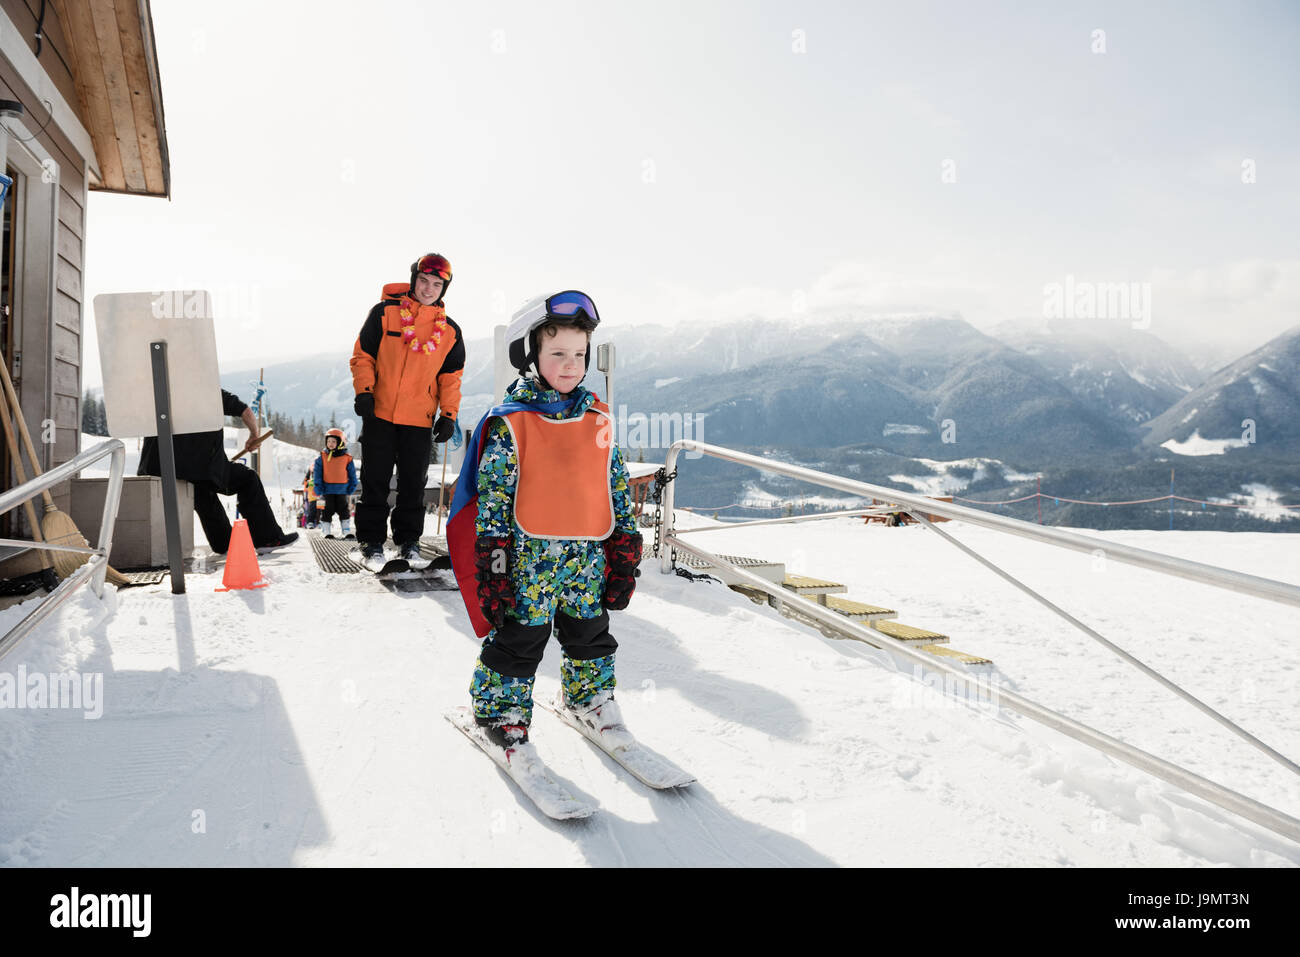 Little boy learning to ski with instructor on snowy slope in ski resort Stock Photo